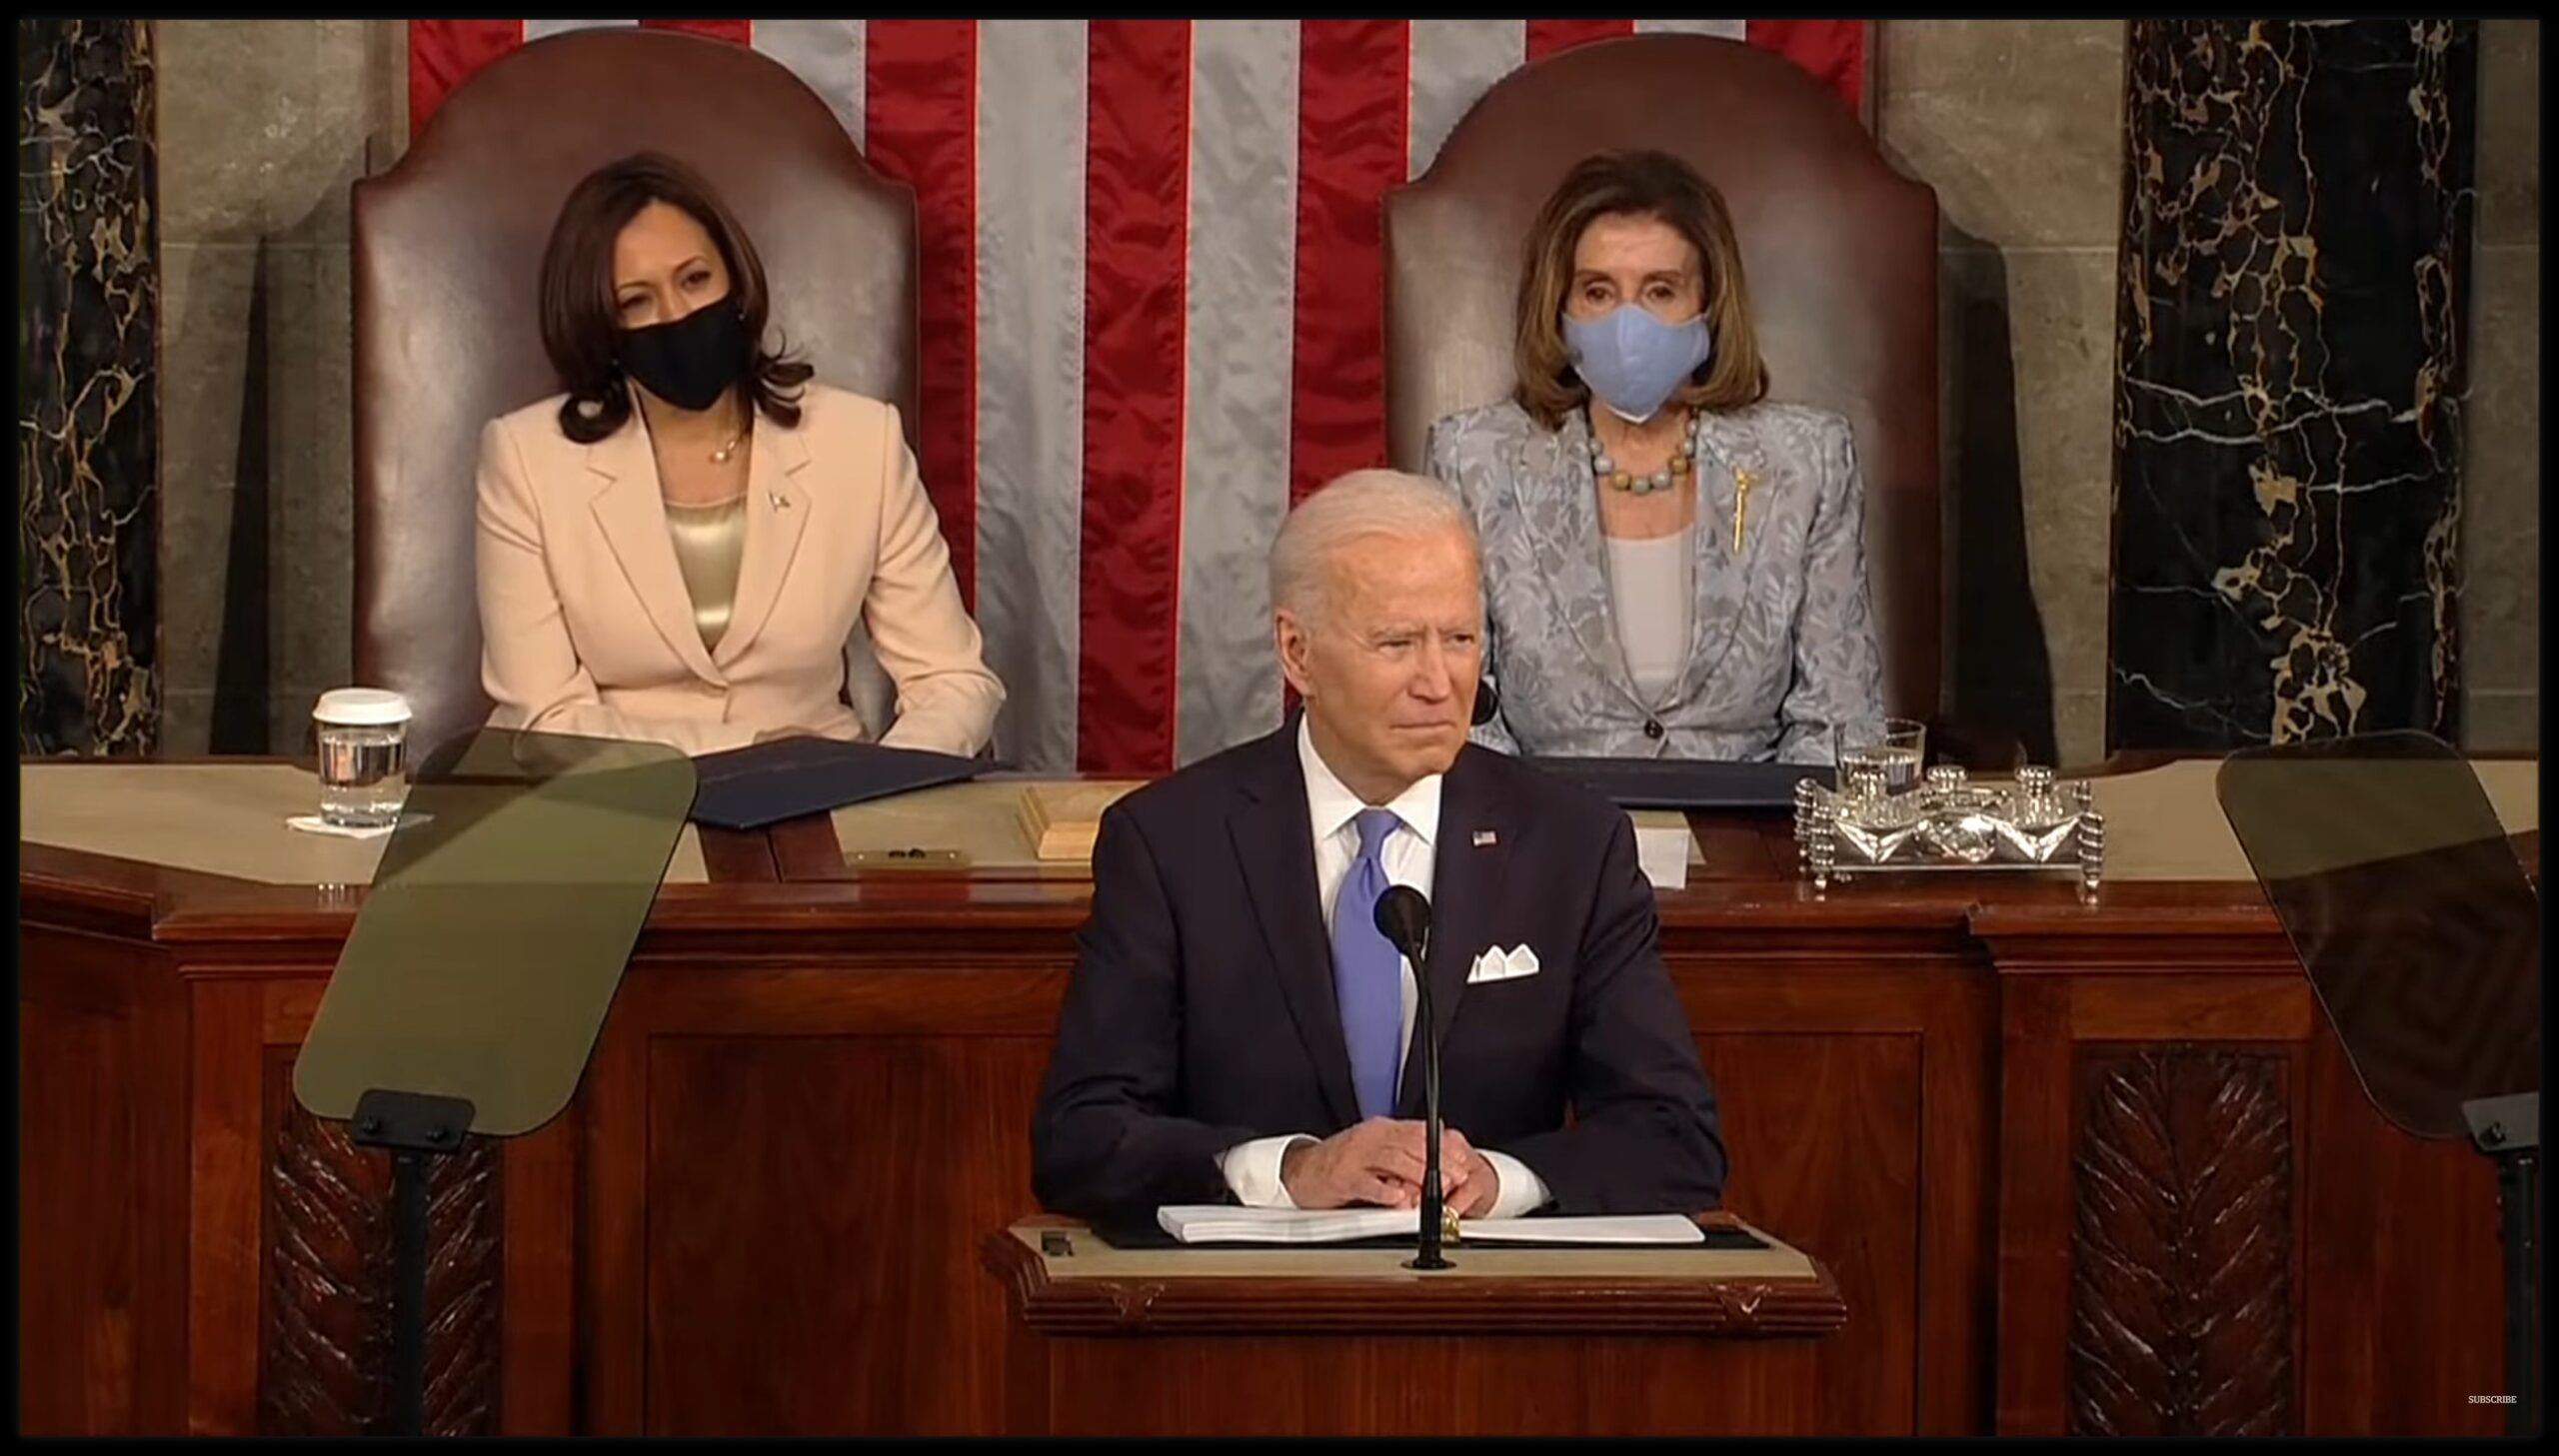 Joe Biden delivers a joint address to Congress on April 28th